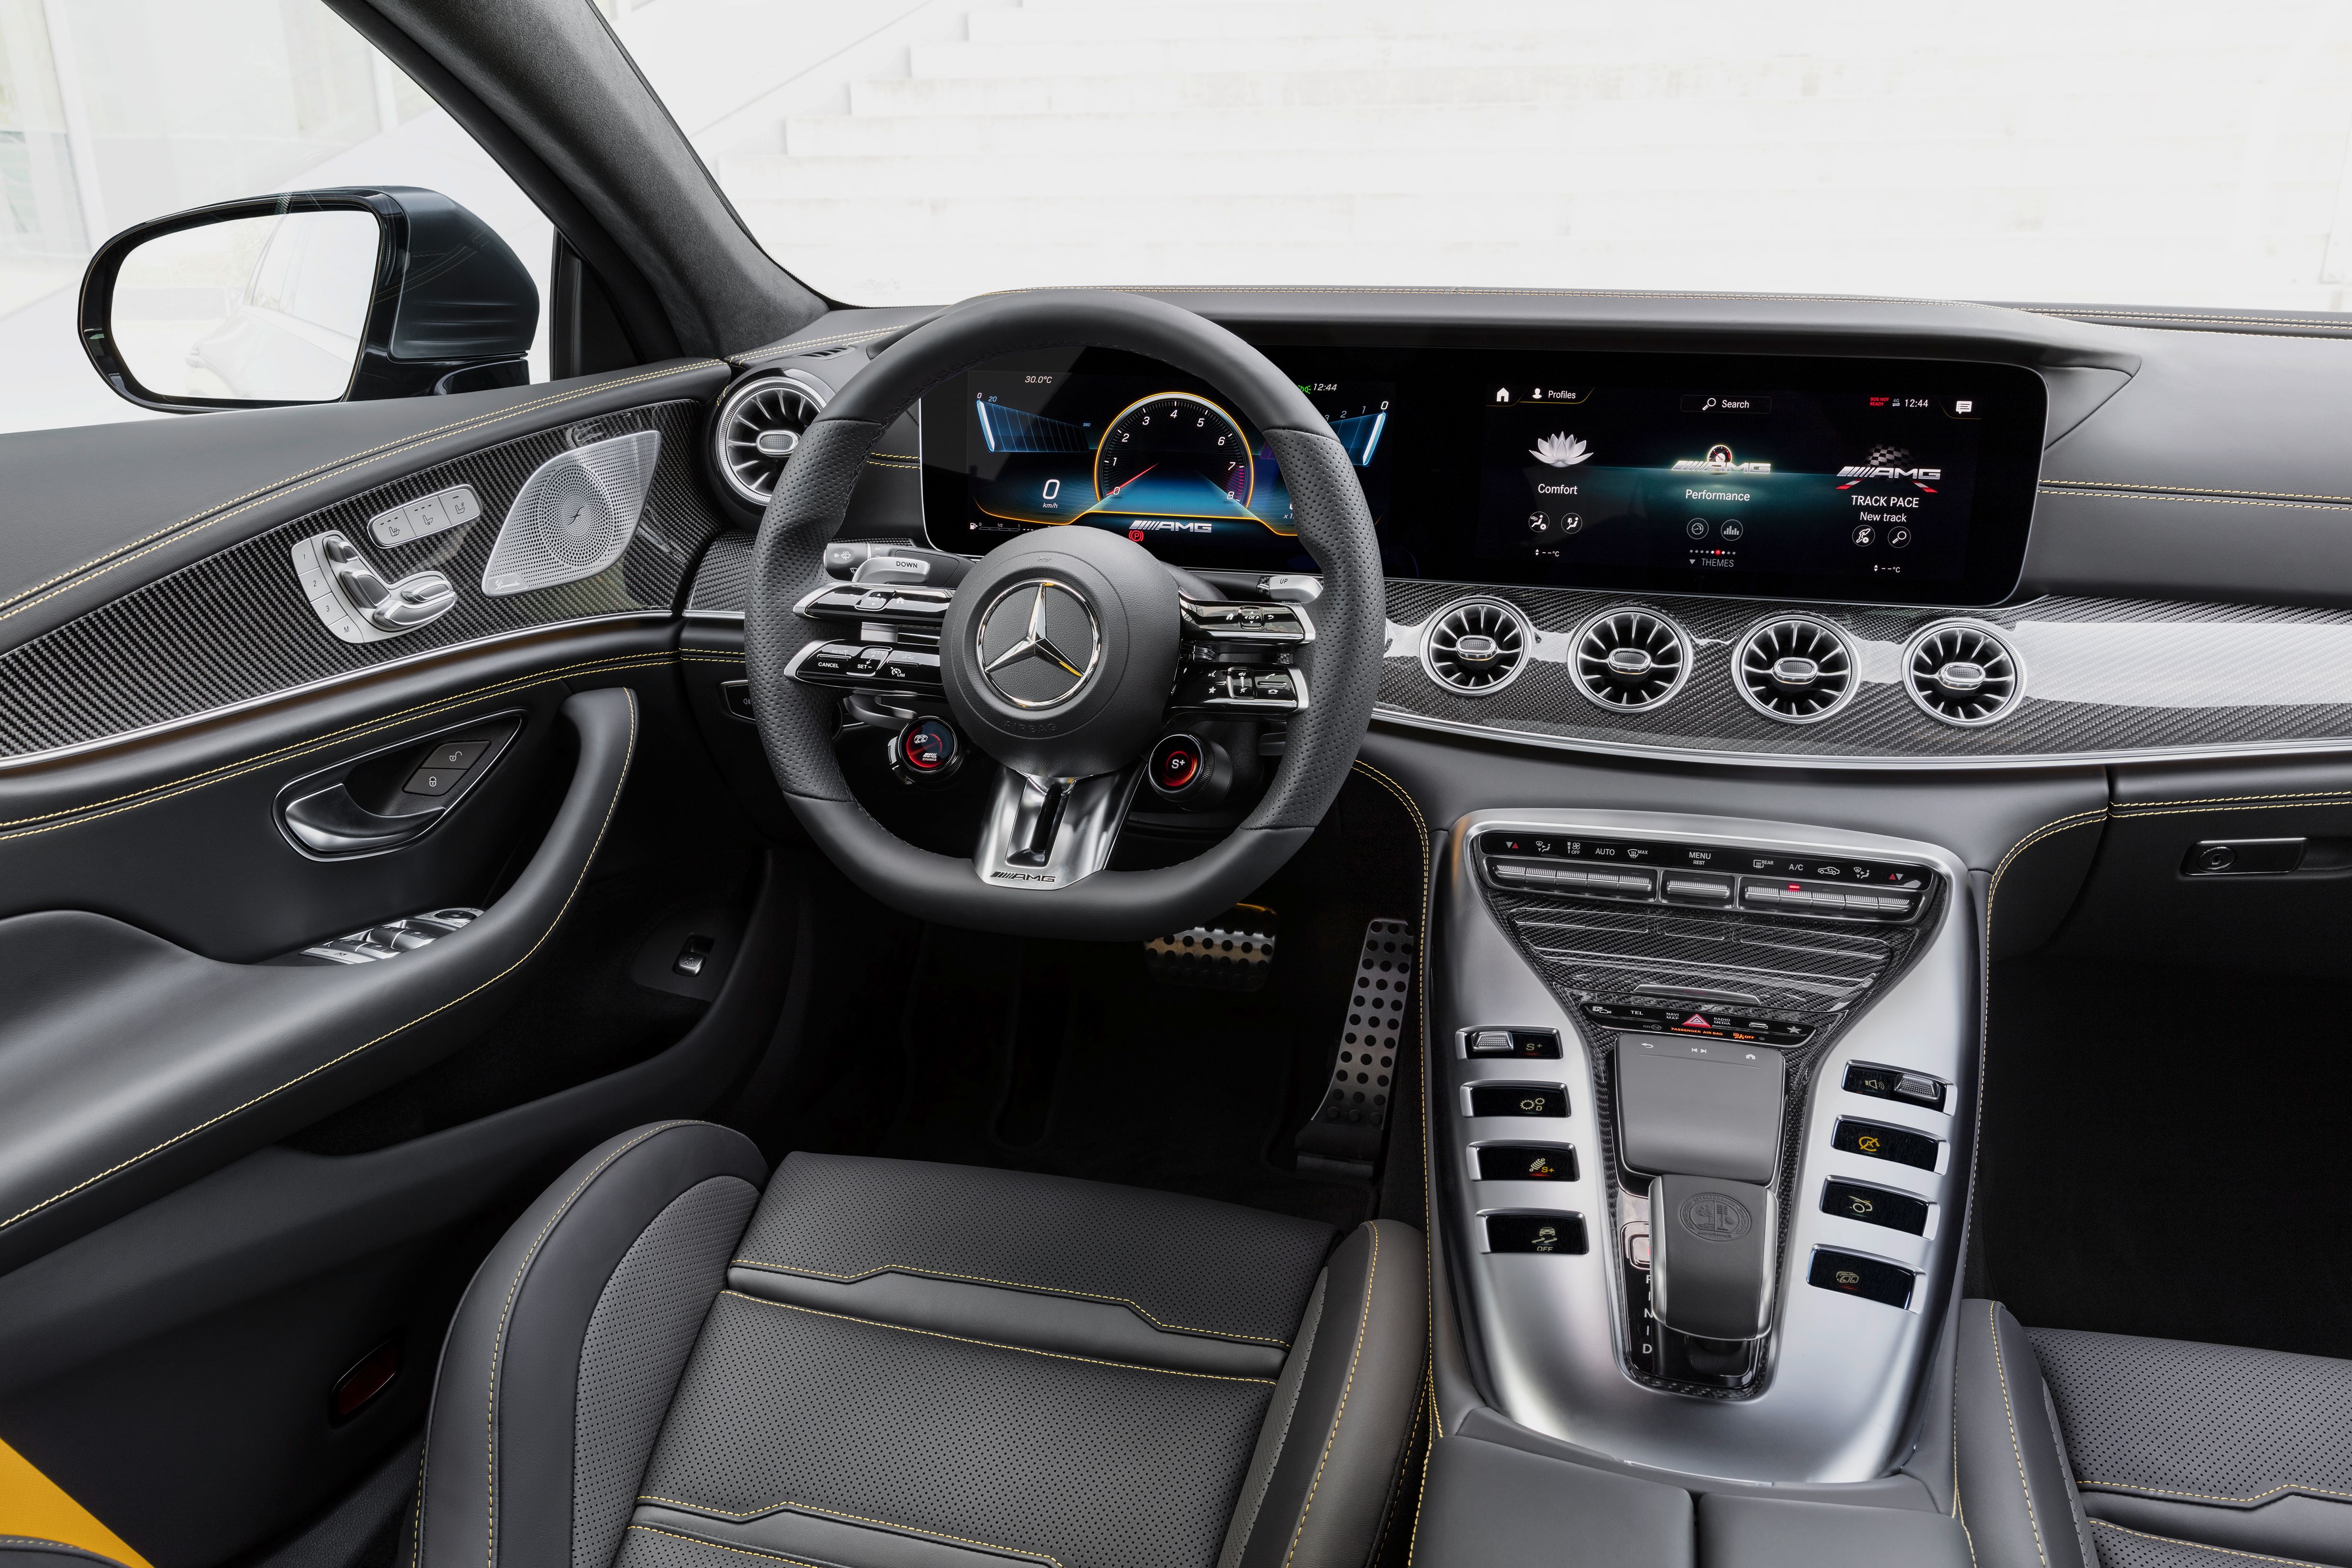 The cabin of the Mercedes-AMG GT63 S.